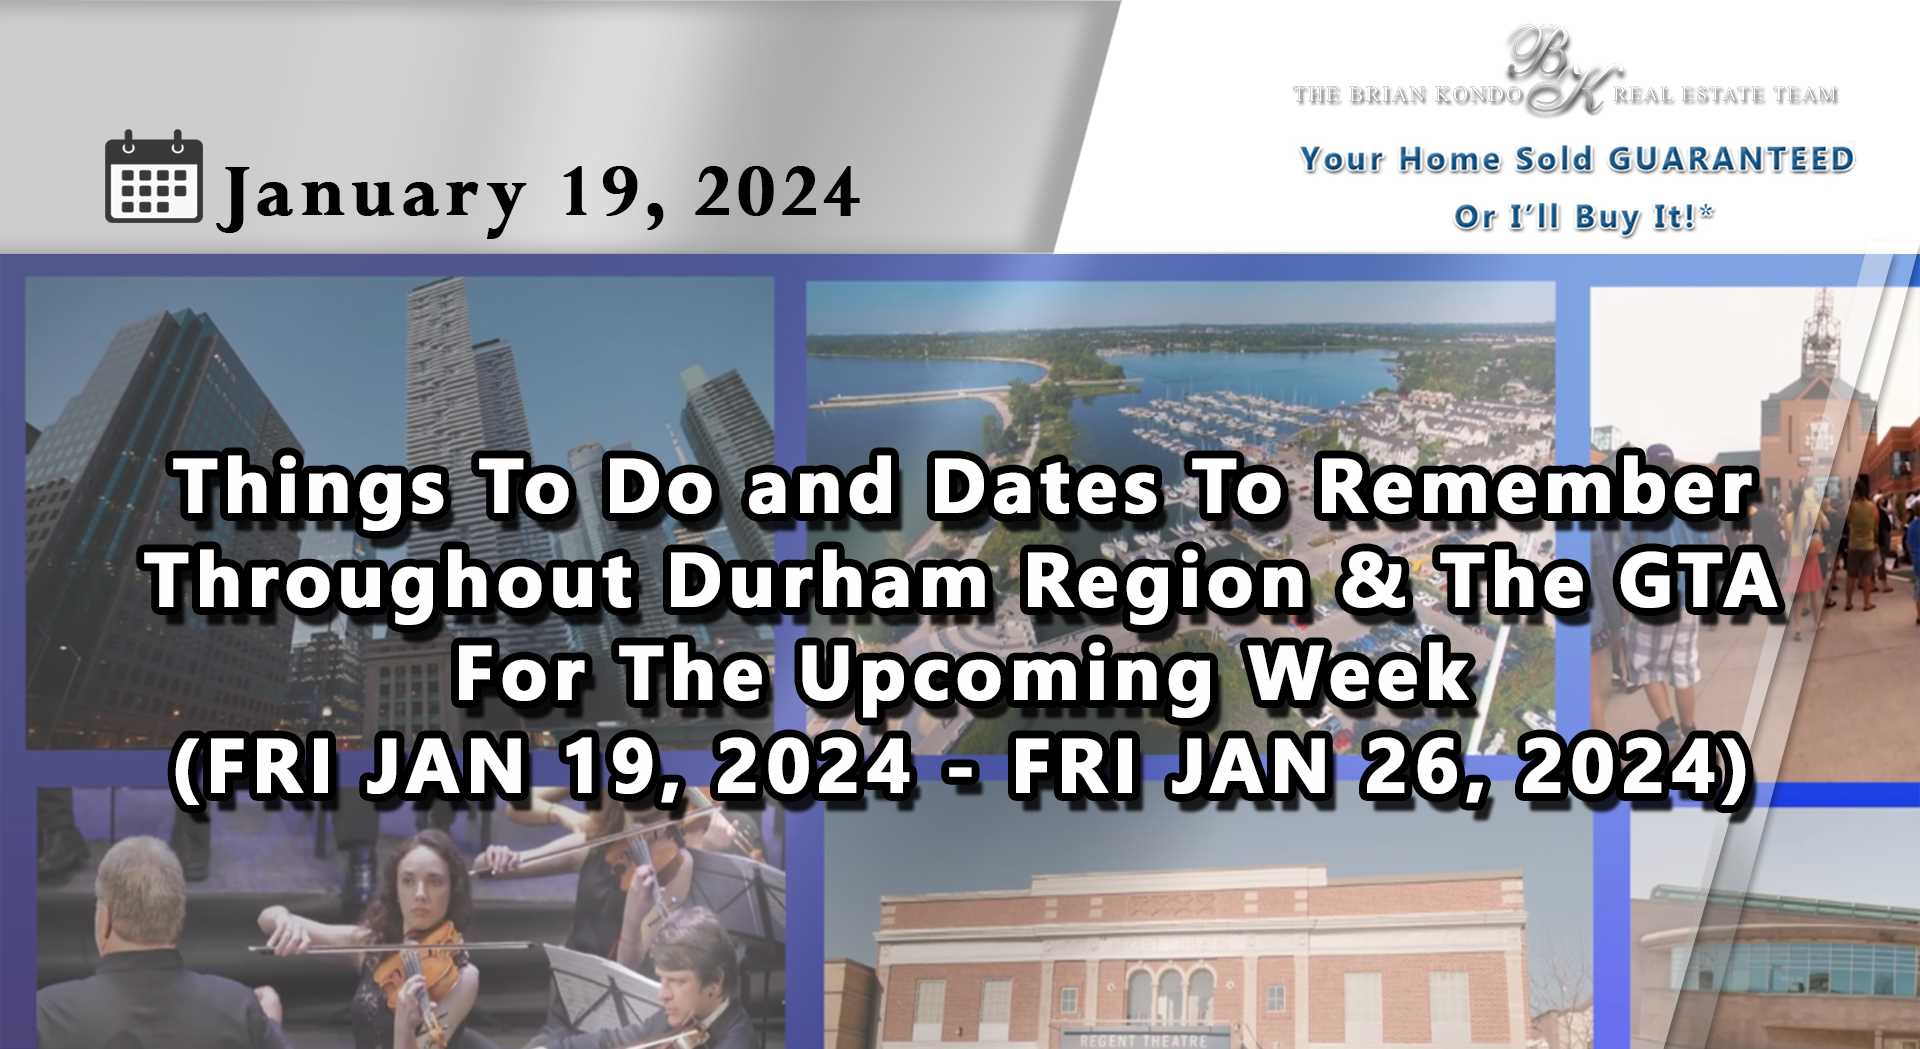 Things To Do and Dates To Remember Throughout Durham Region and The GTA For The Upcoming Week (FRI JAN 19, 2024 - FRI JAN 26, 2024)